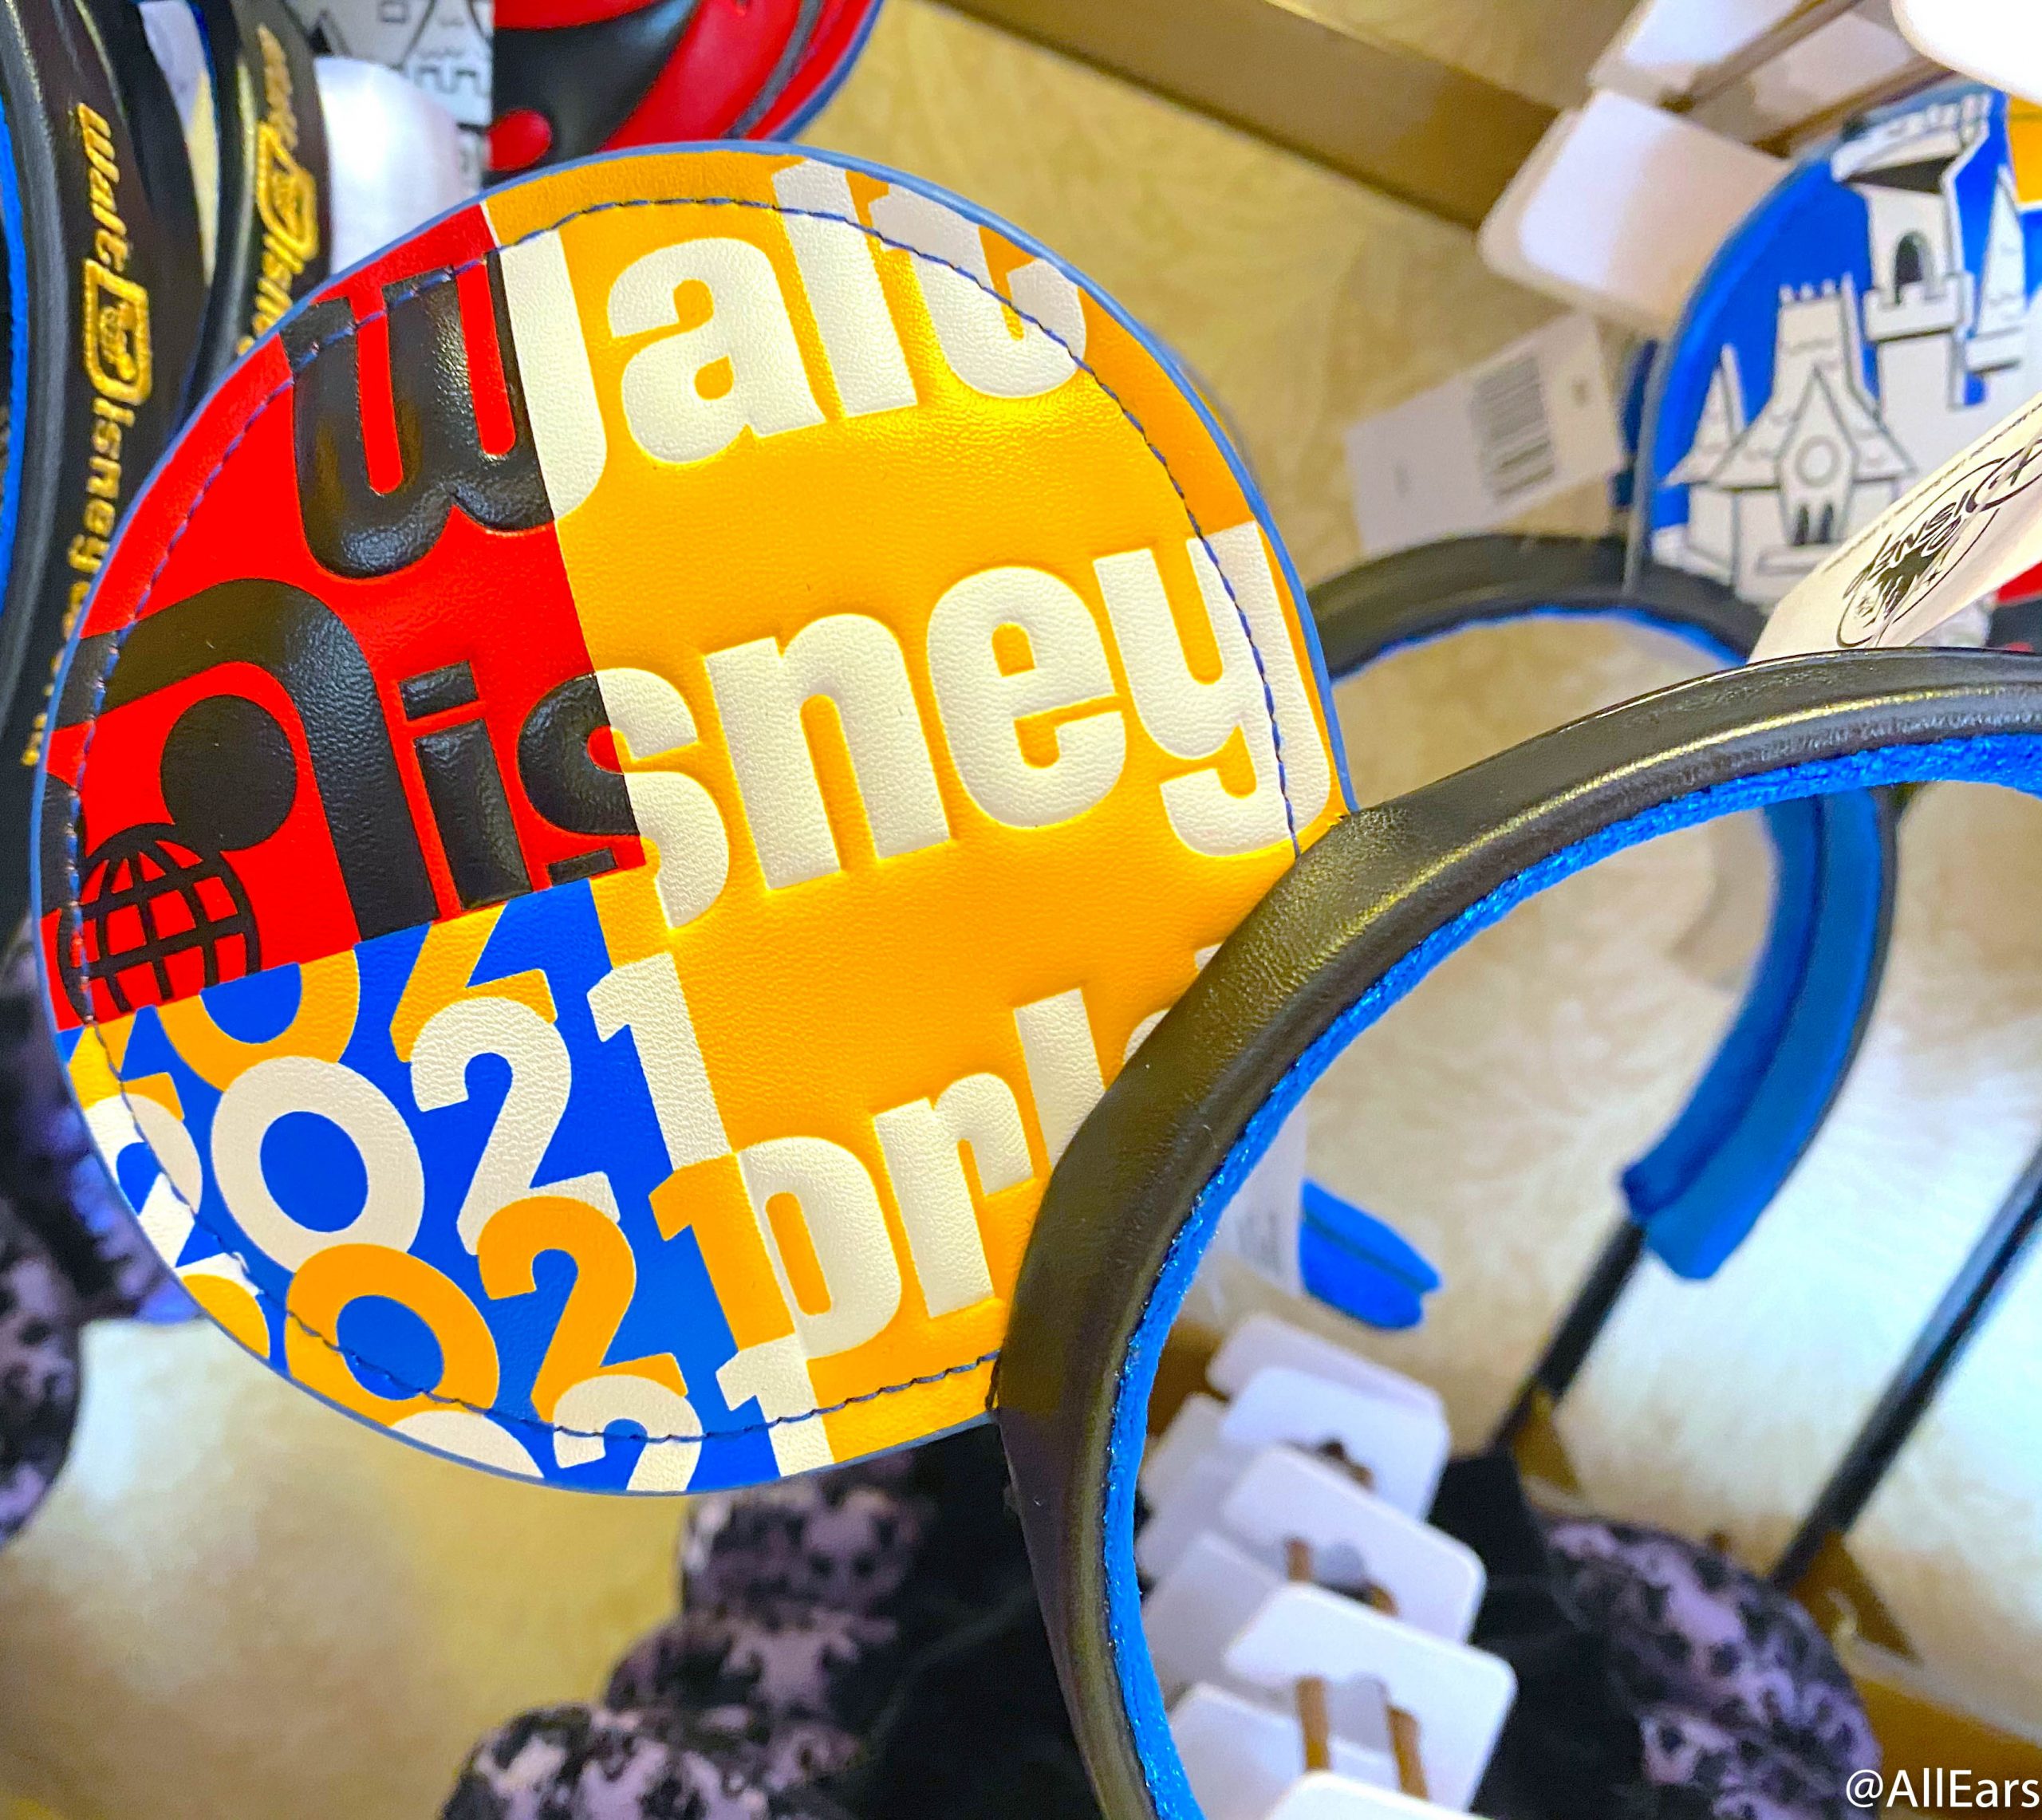 The 2021 Ears Have Arrived in Disney World Just in Time to